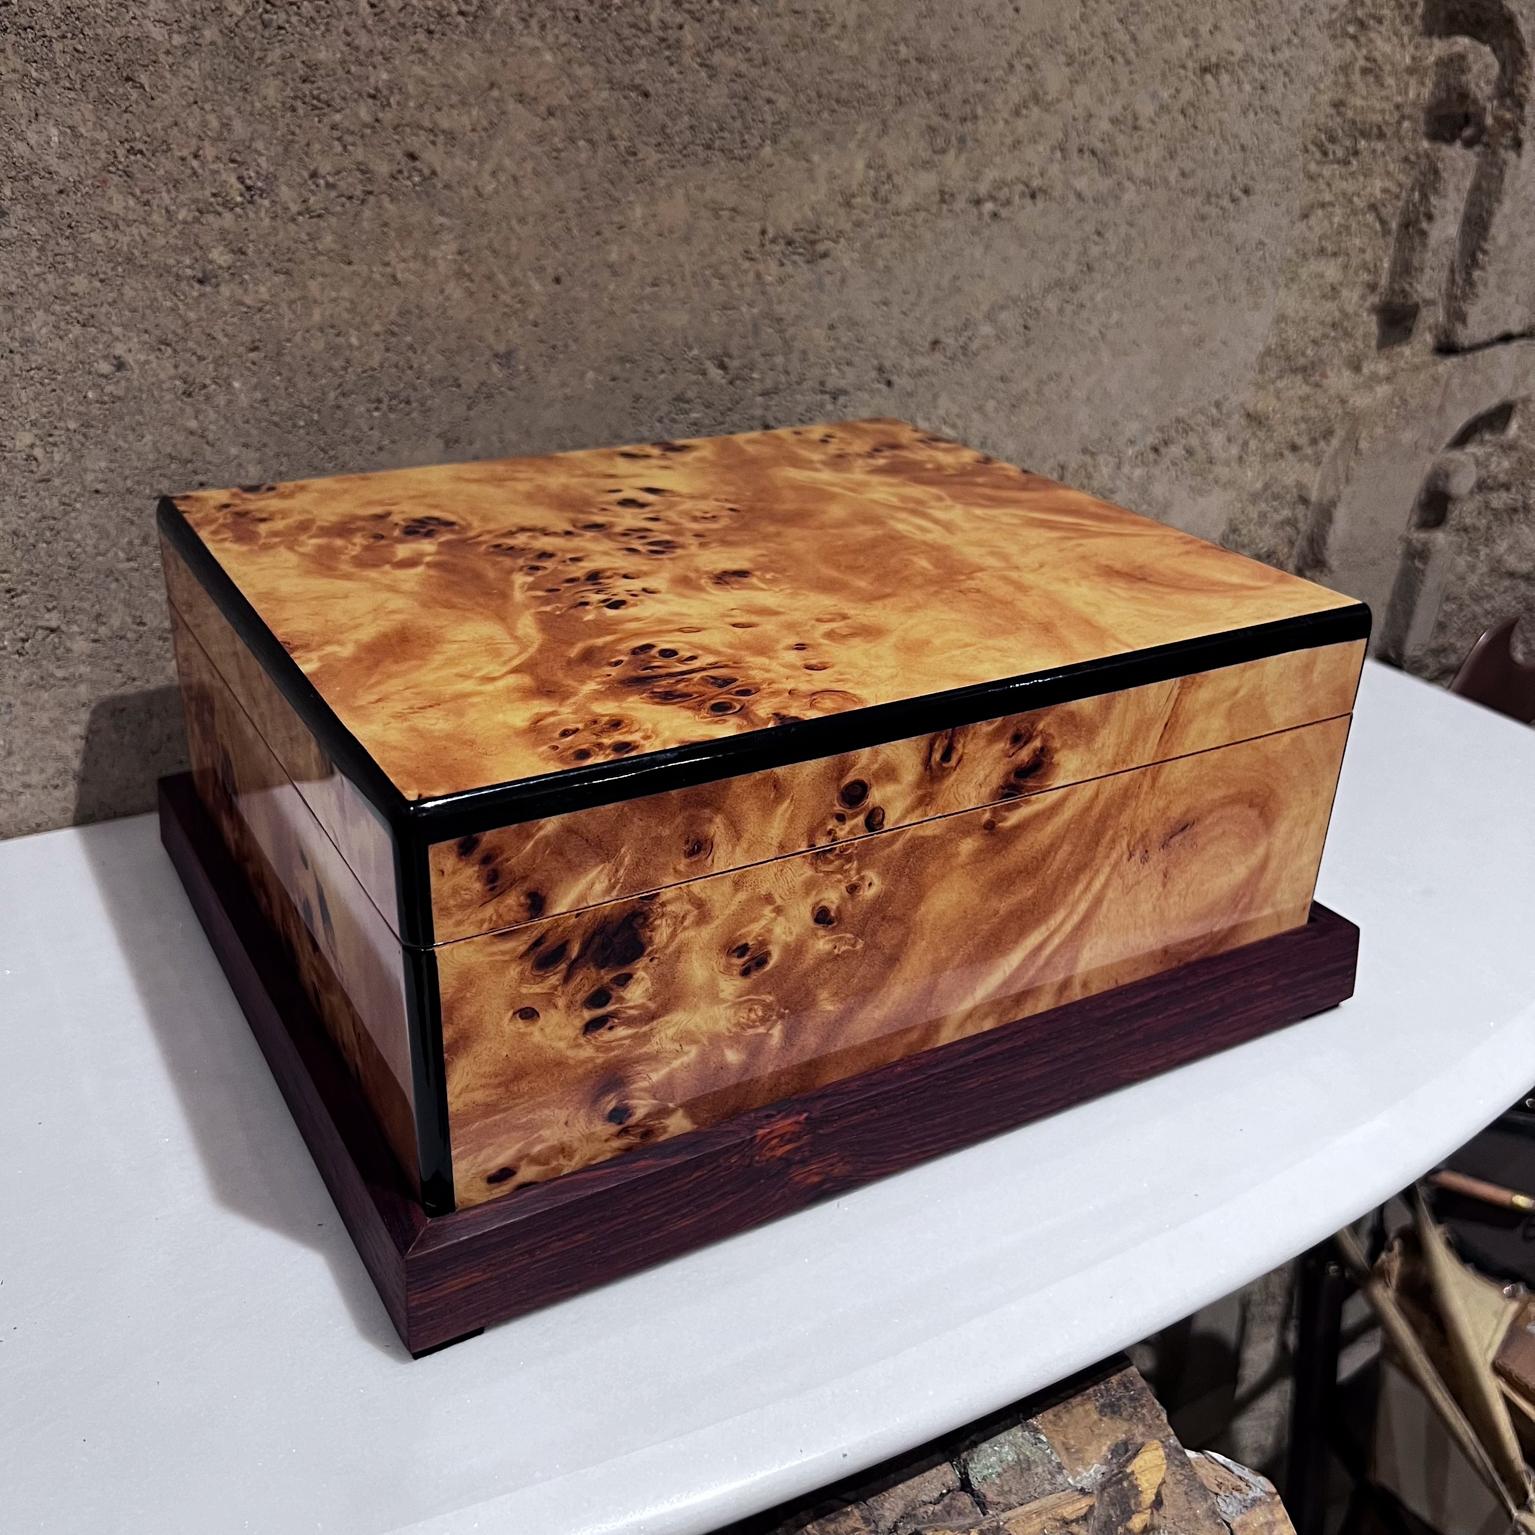 20th Mid Century Hand crafted Burlwood Humidor Cigar Storage Box
In the manner of Dunhill and Davidoff
4.75 h x 11 w x 9.75
Burl wood with exotic woods.
Preowned original vintage condition
Refer to images provided.